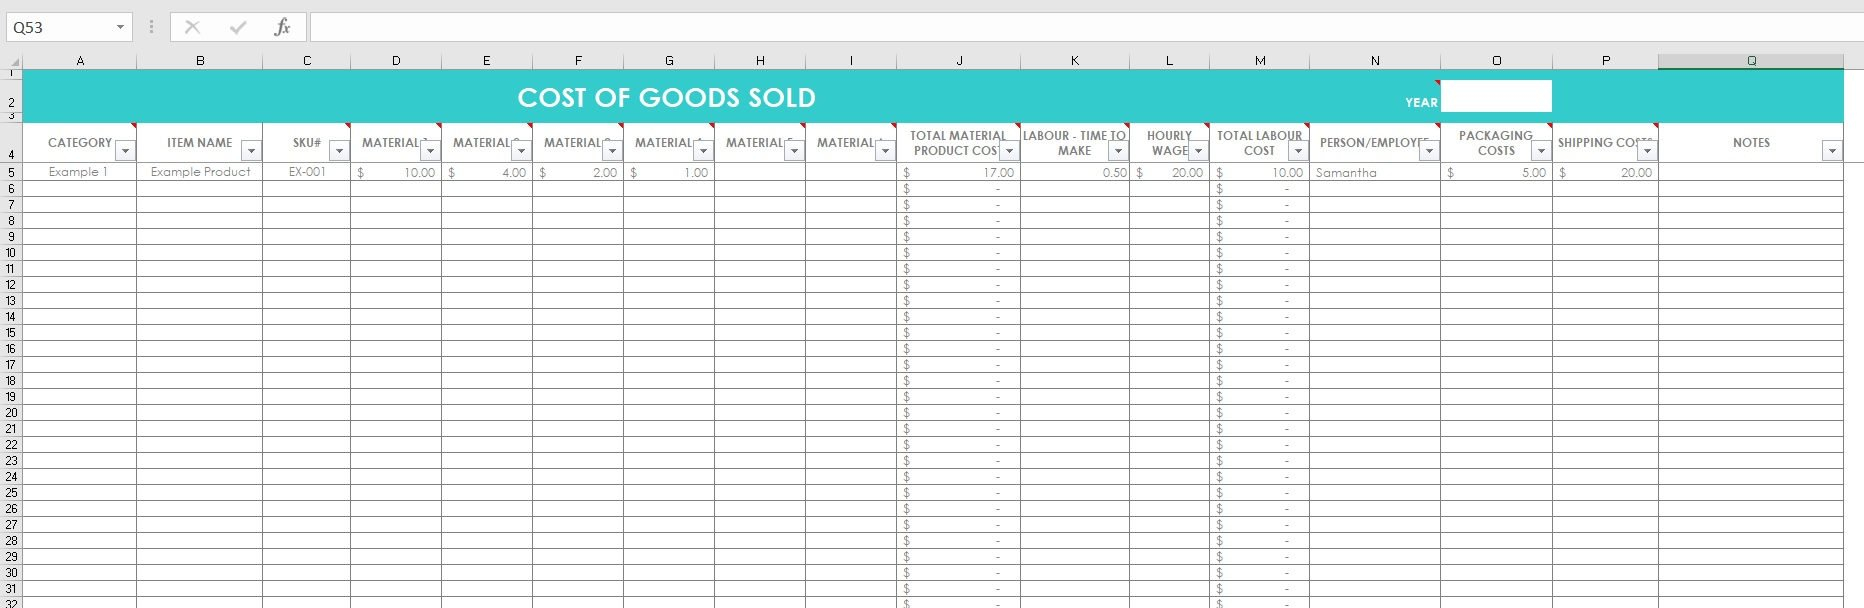 Cost Of Goods Sold Inventory Spreadsheet Etsy Seller Tool Shop | Etsy Together With Etsy Spreadsheet